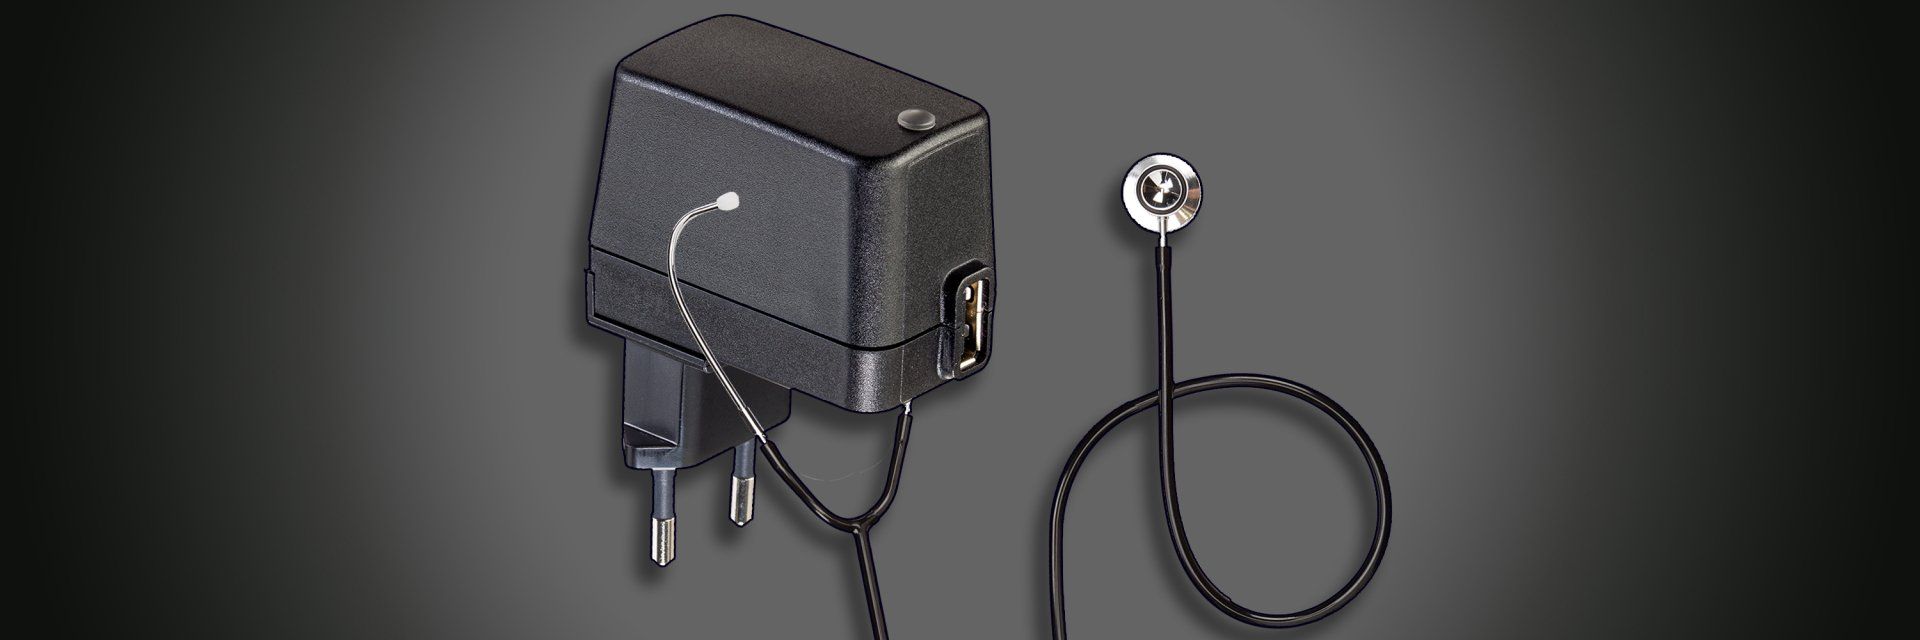 A USB power supply with a stethoscope attached to it